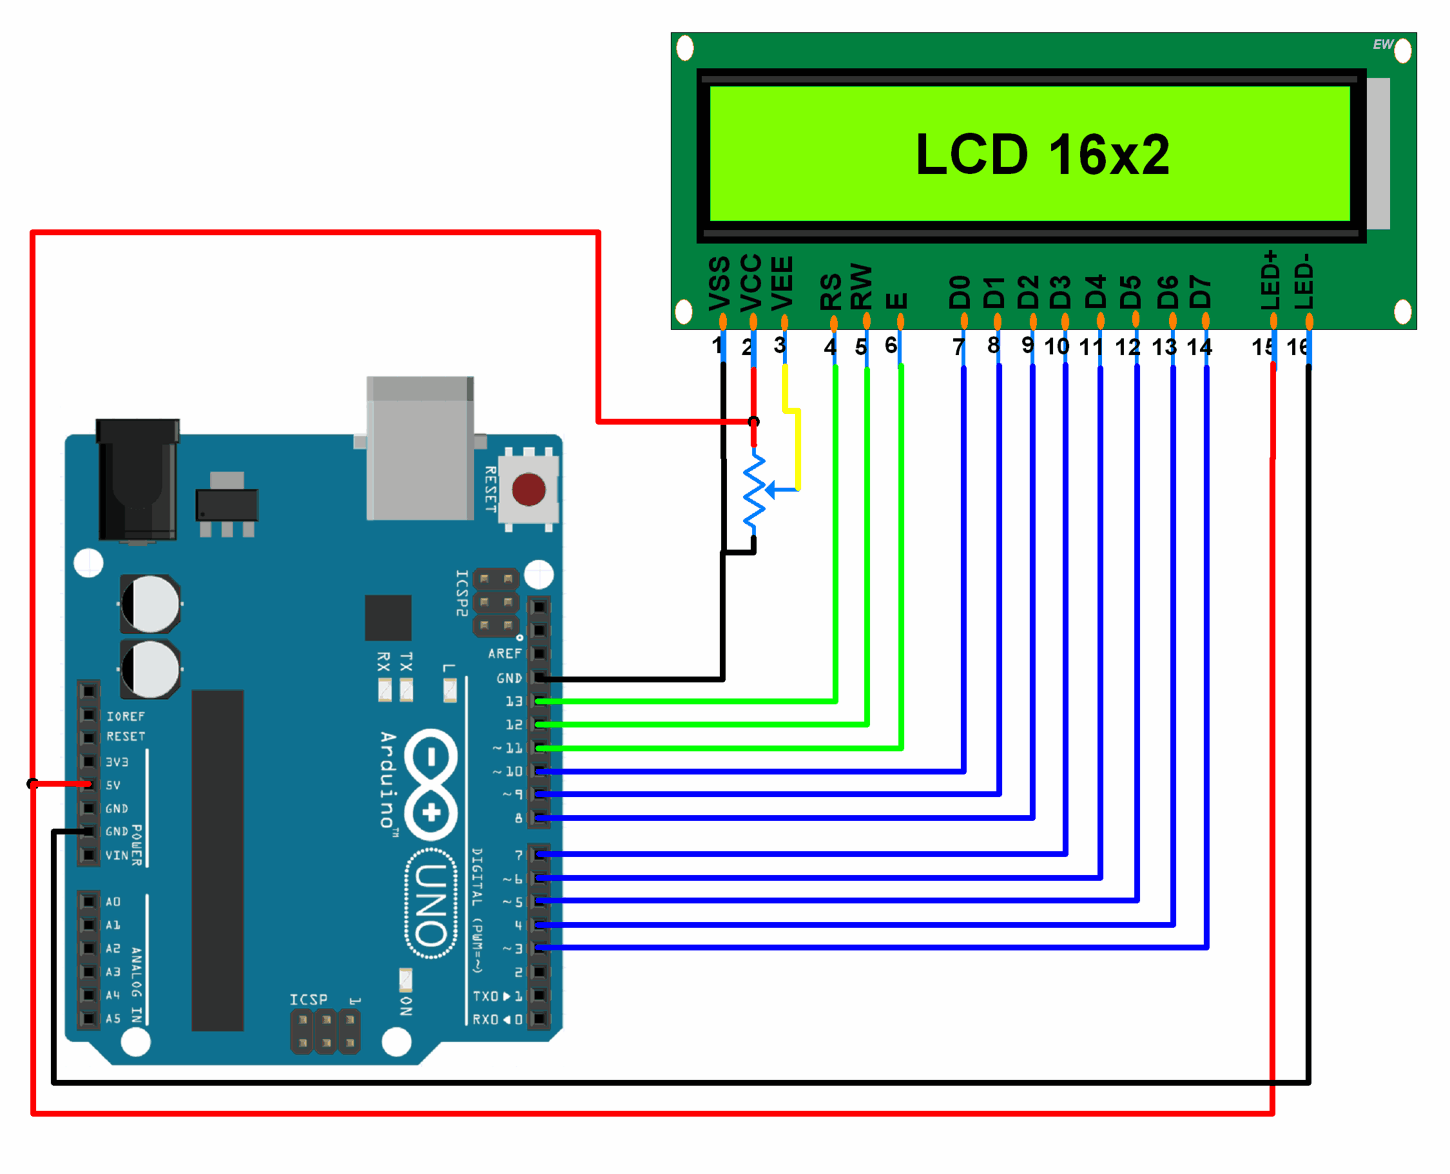 16x2 Lcd Pinout Diagram Interfacing 16x2 Lcd With Arduino | CLOOBX HOT GIRL